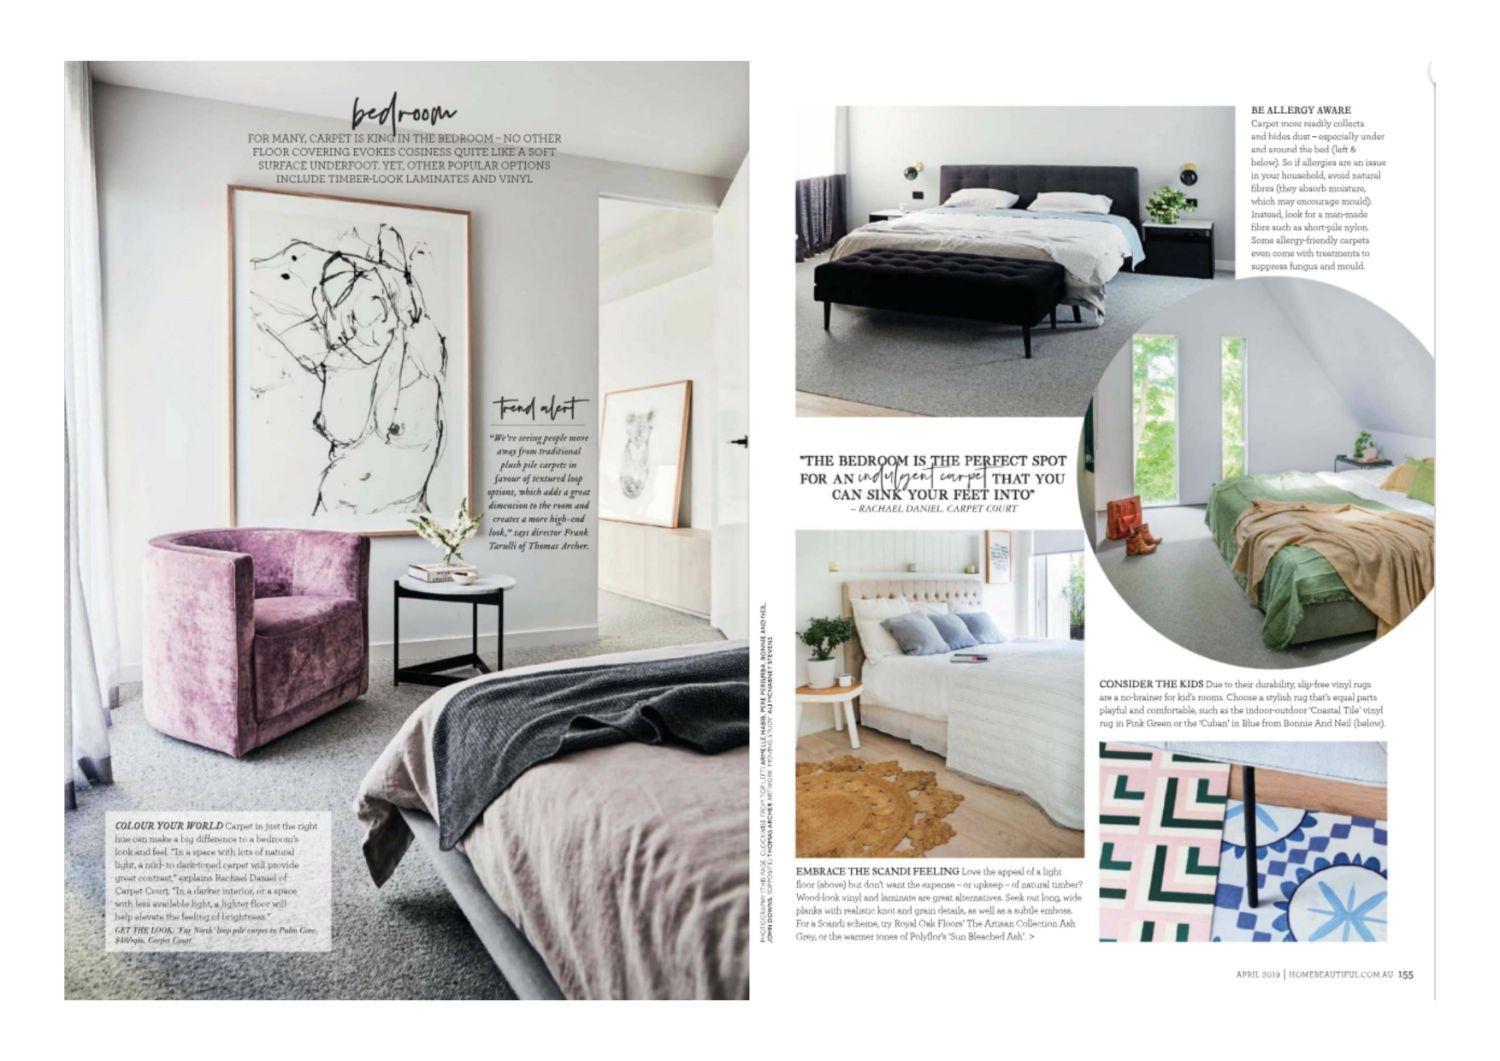 Thomas Archer is interviewed by the Home Beautiful Magazine about flooring trends.